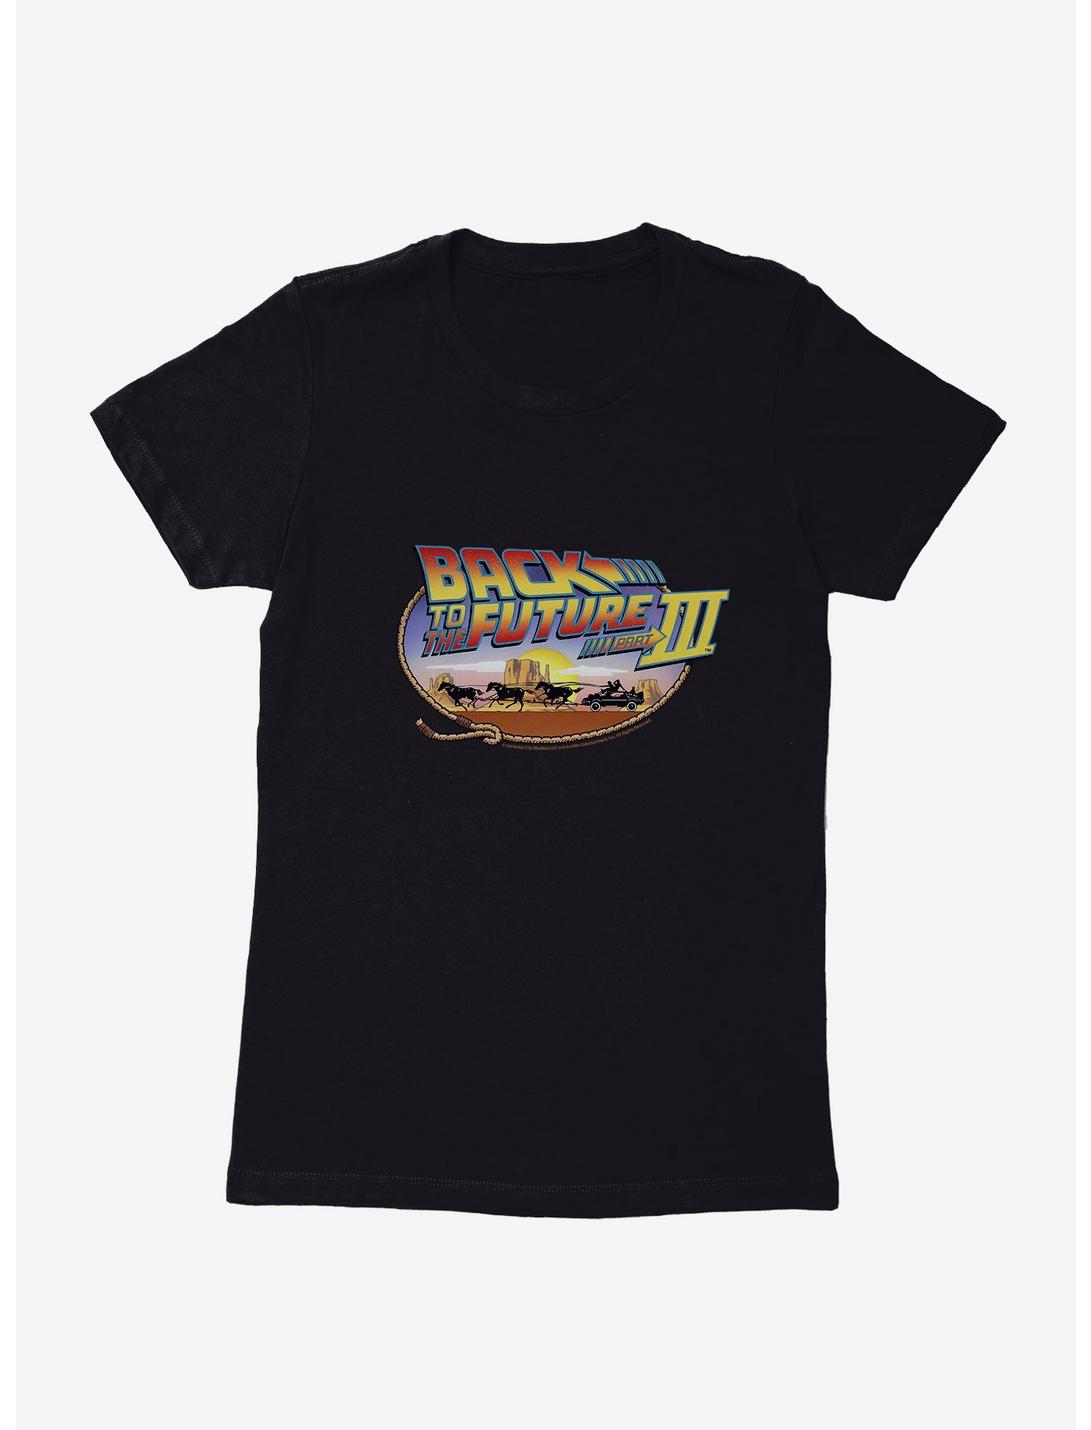 Back To The Future Part III Title Scene Womens T-Shirt, BLACK, hi-res